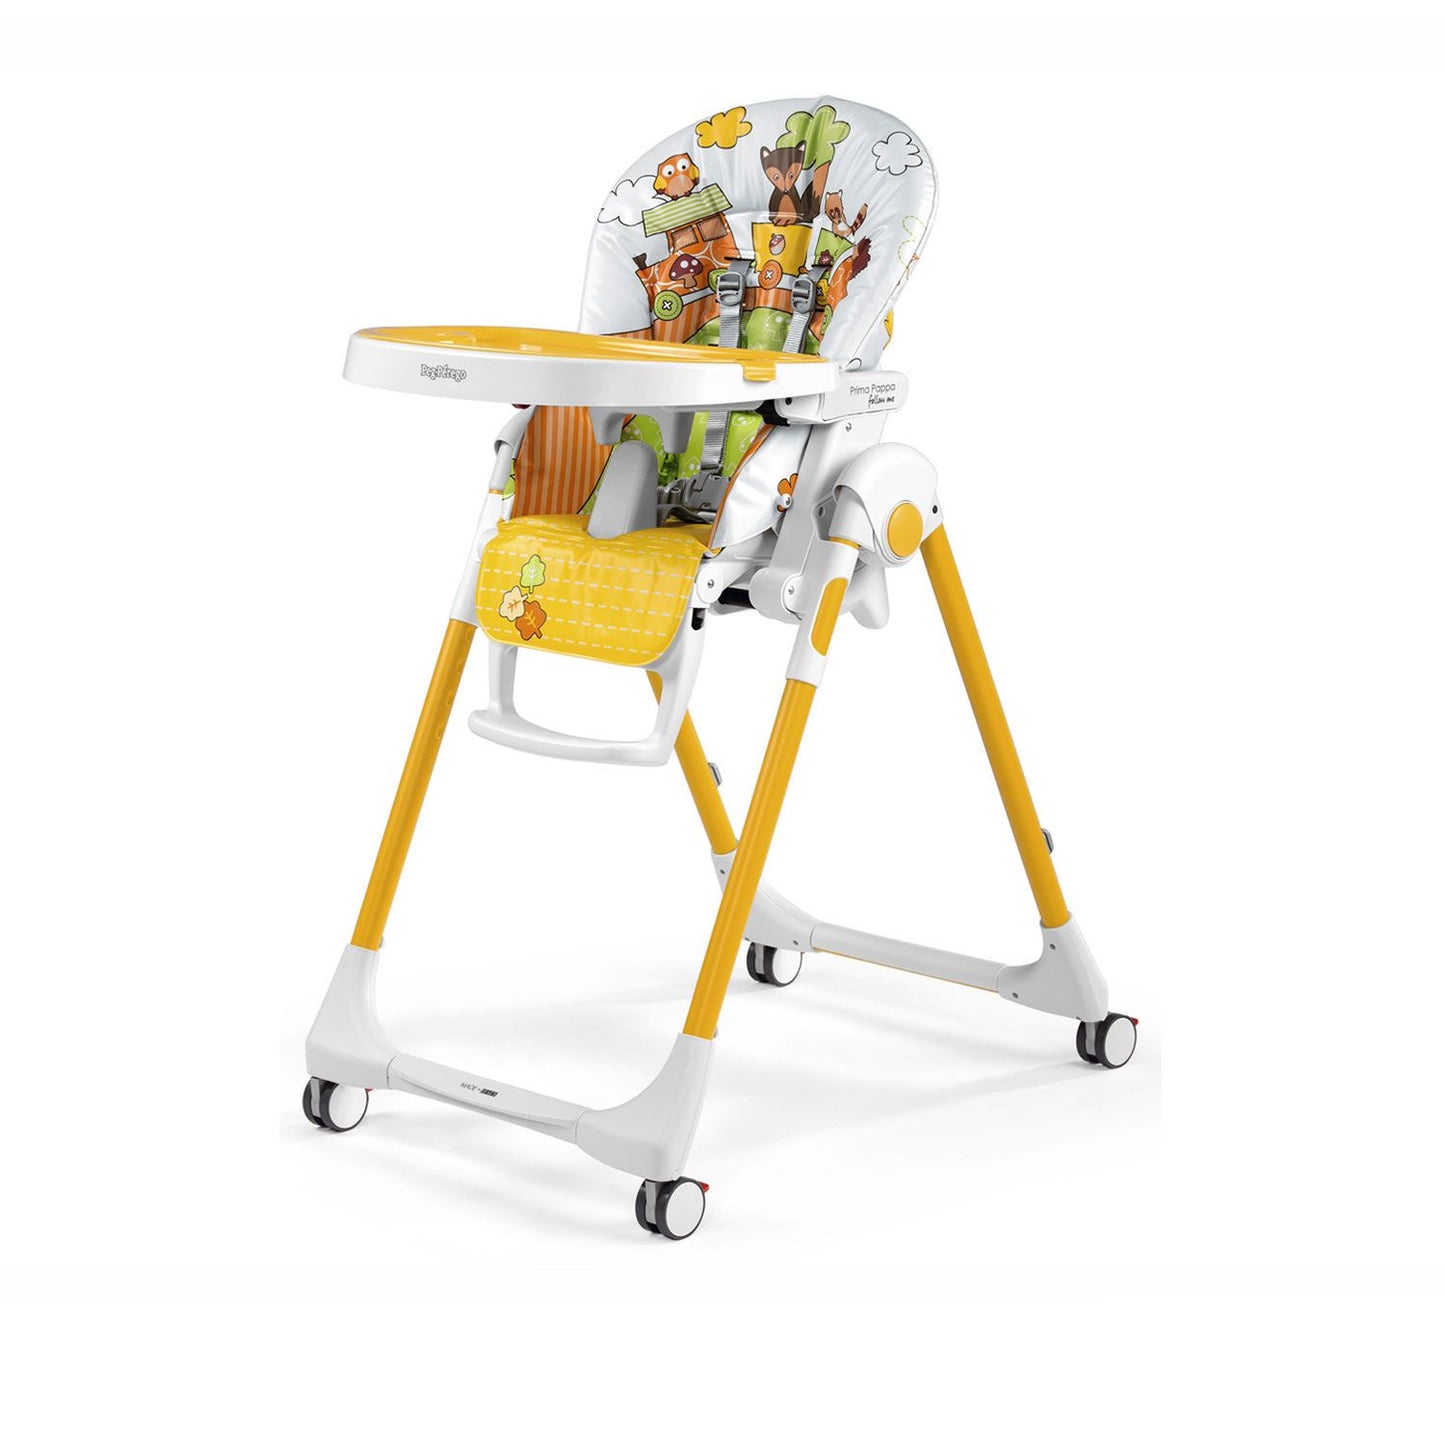 Peg Perego - Prima Pappa Follow Me Eco-leather high chair